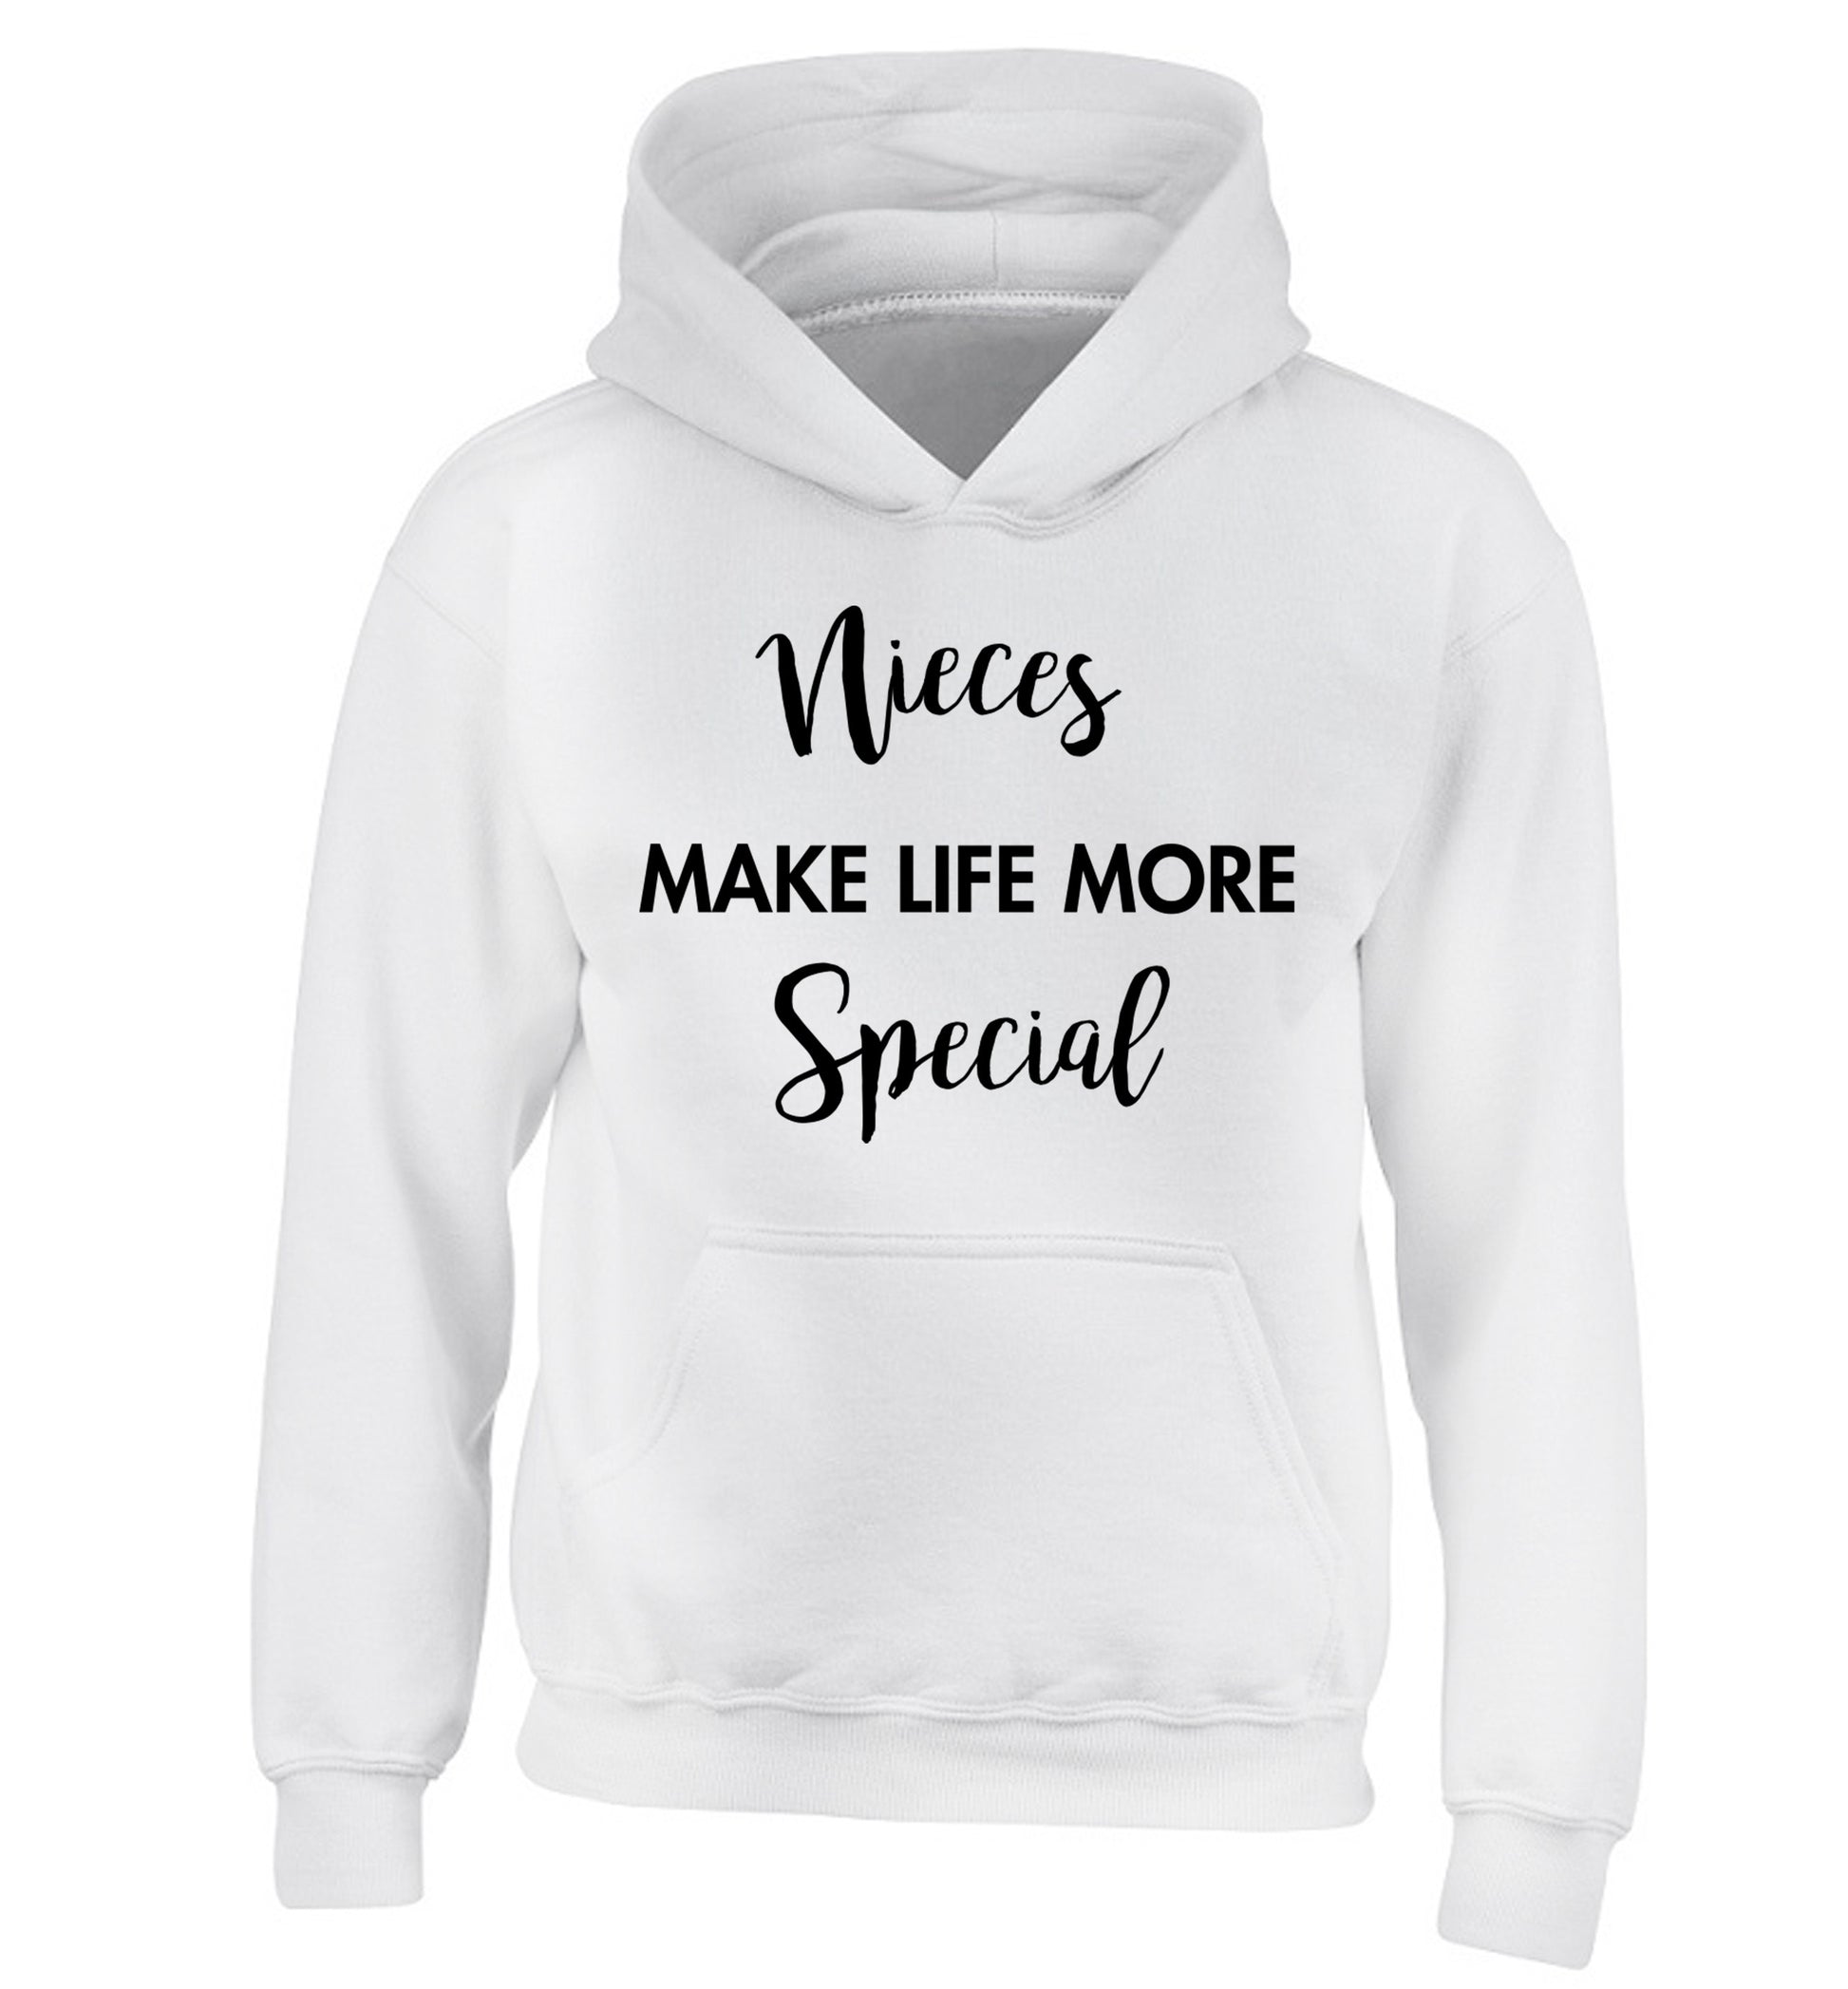 Nieces make life more special children's white hoodie 12-14 Years